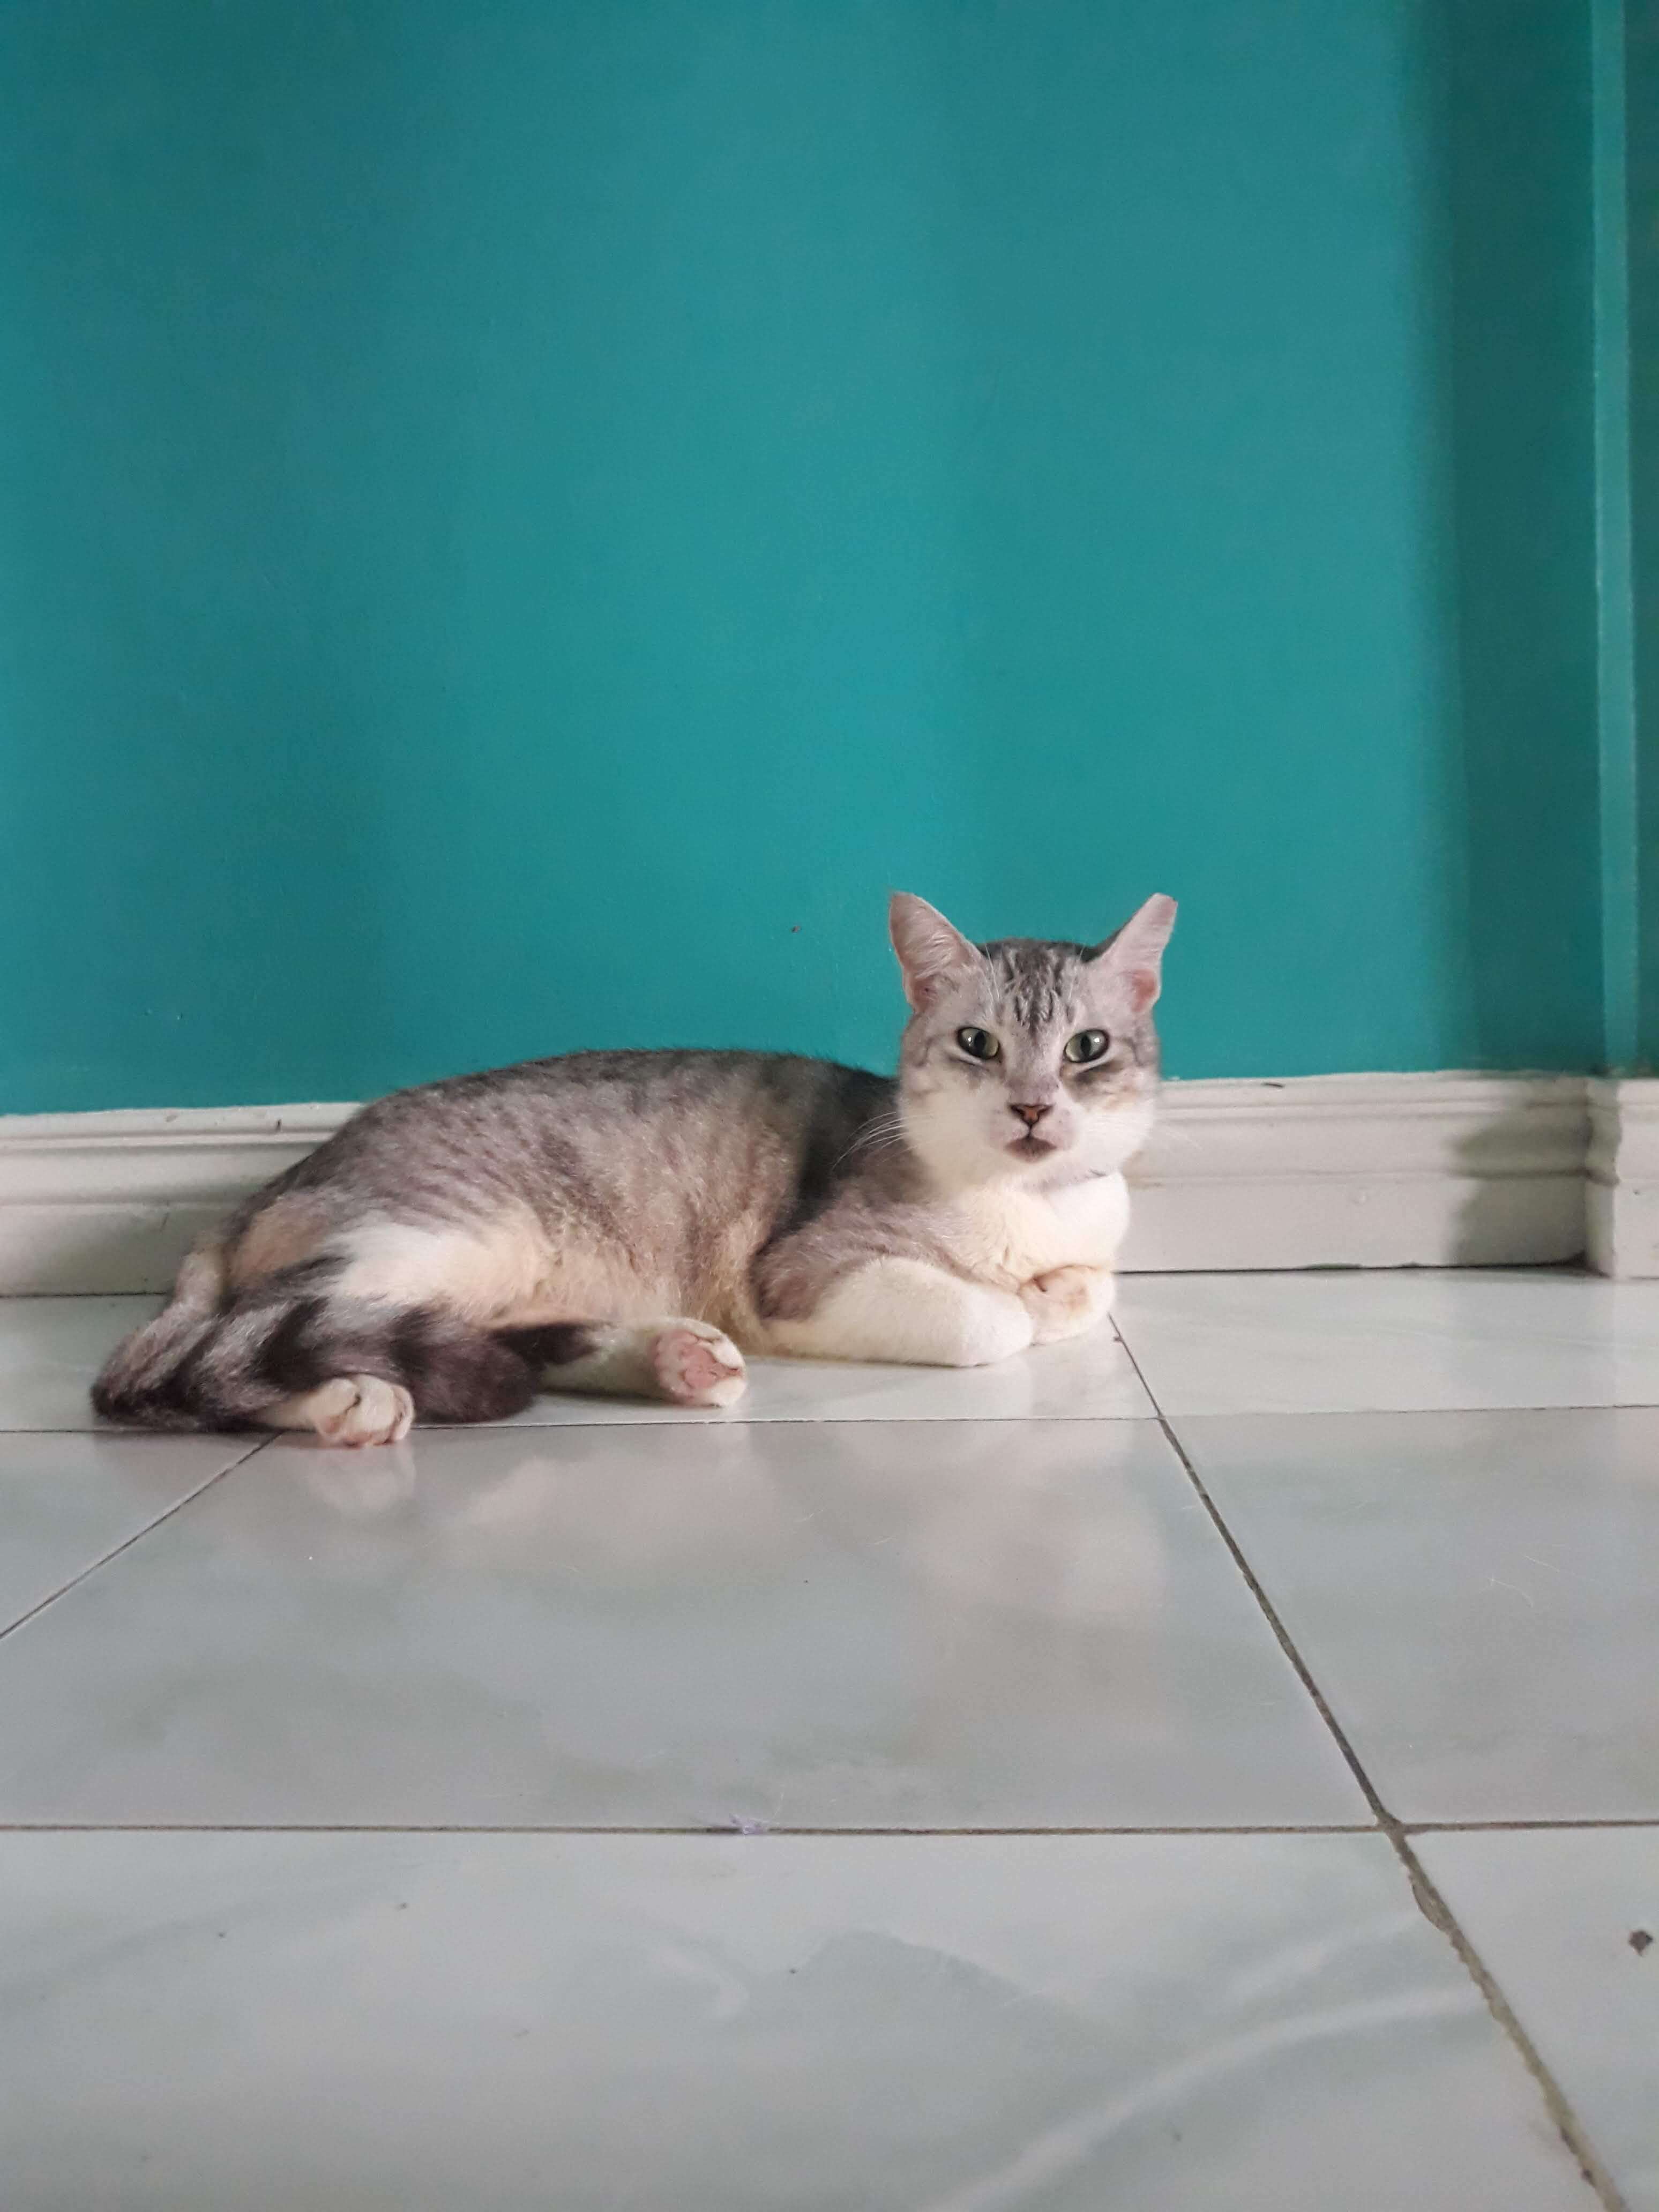 Picture of Edgar, a grey cat lounging on the tiled floor against an aquamarine wall, looking straight into the camera